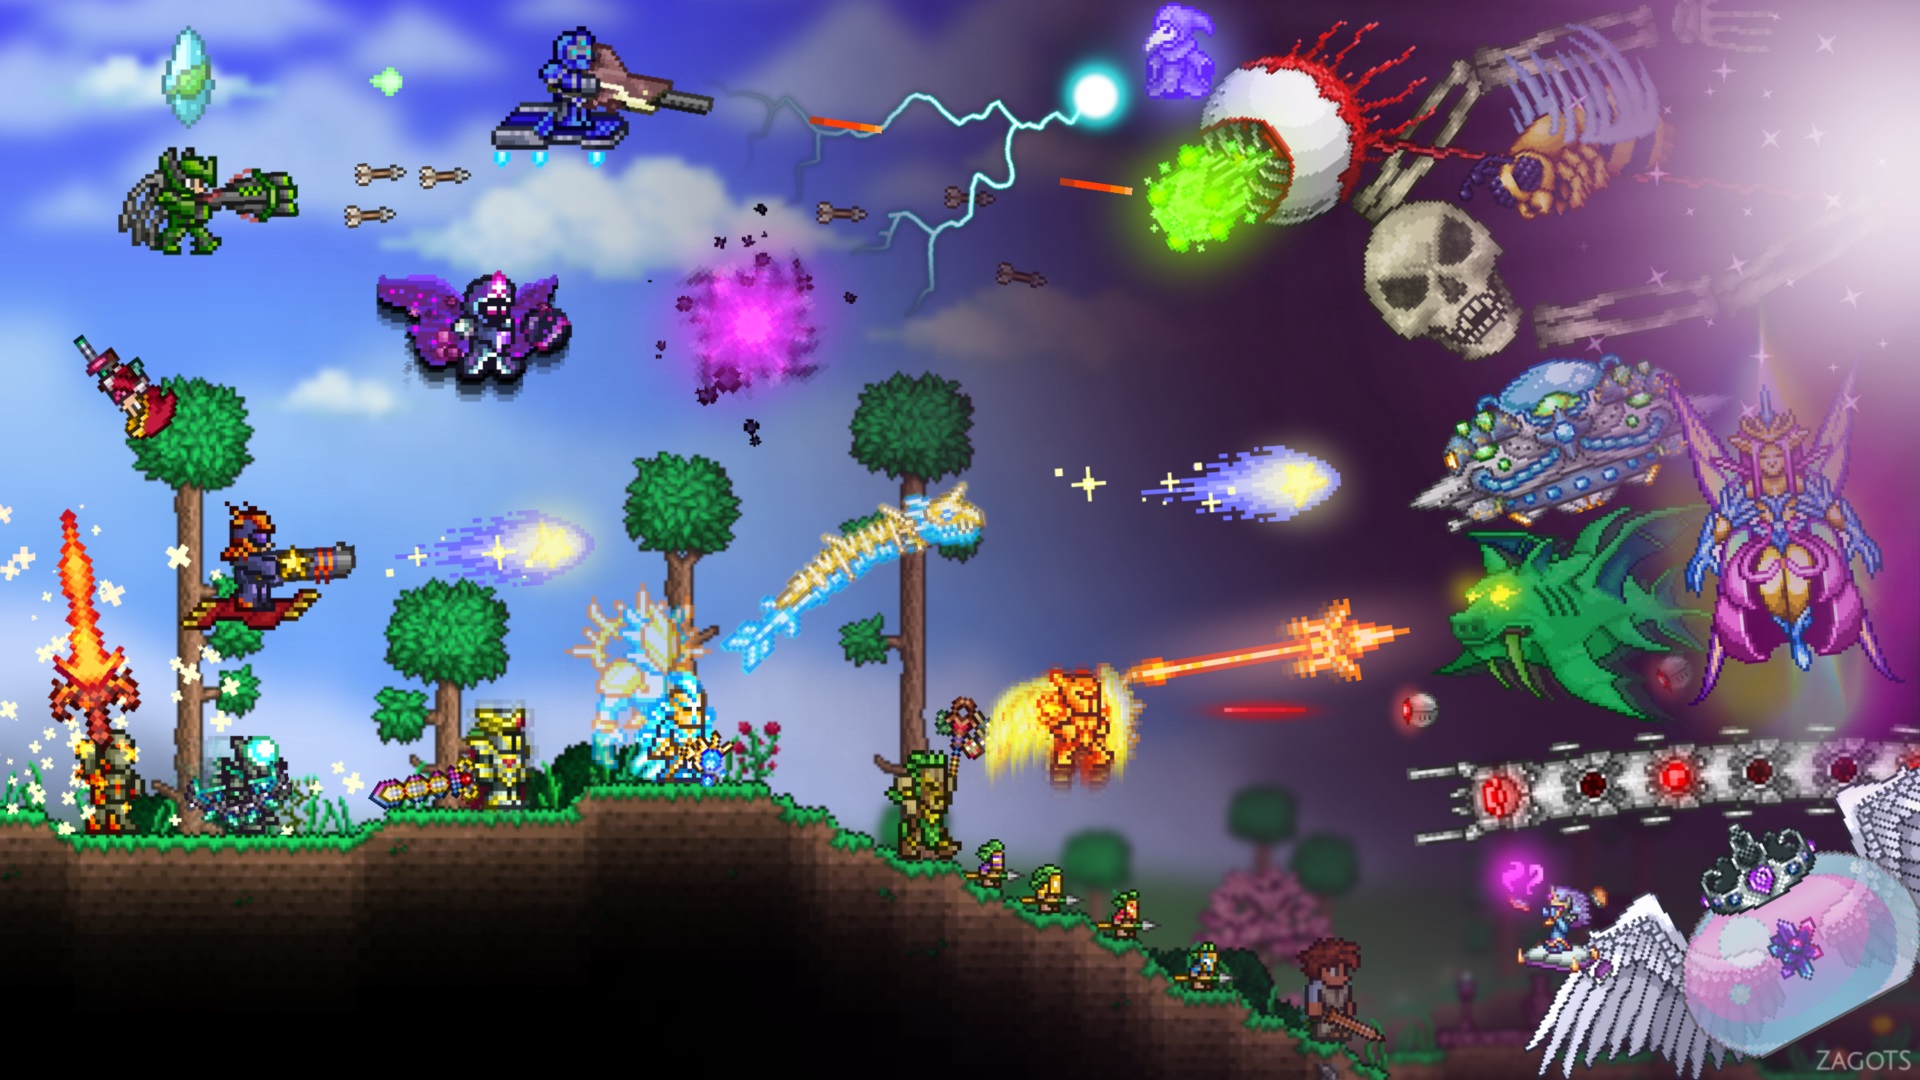 Terraria 1.4 Switch Update Appears, Lacks Some Multiplayer Options